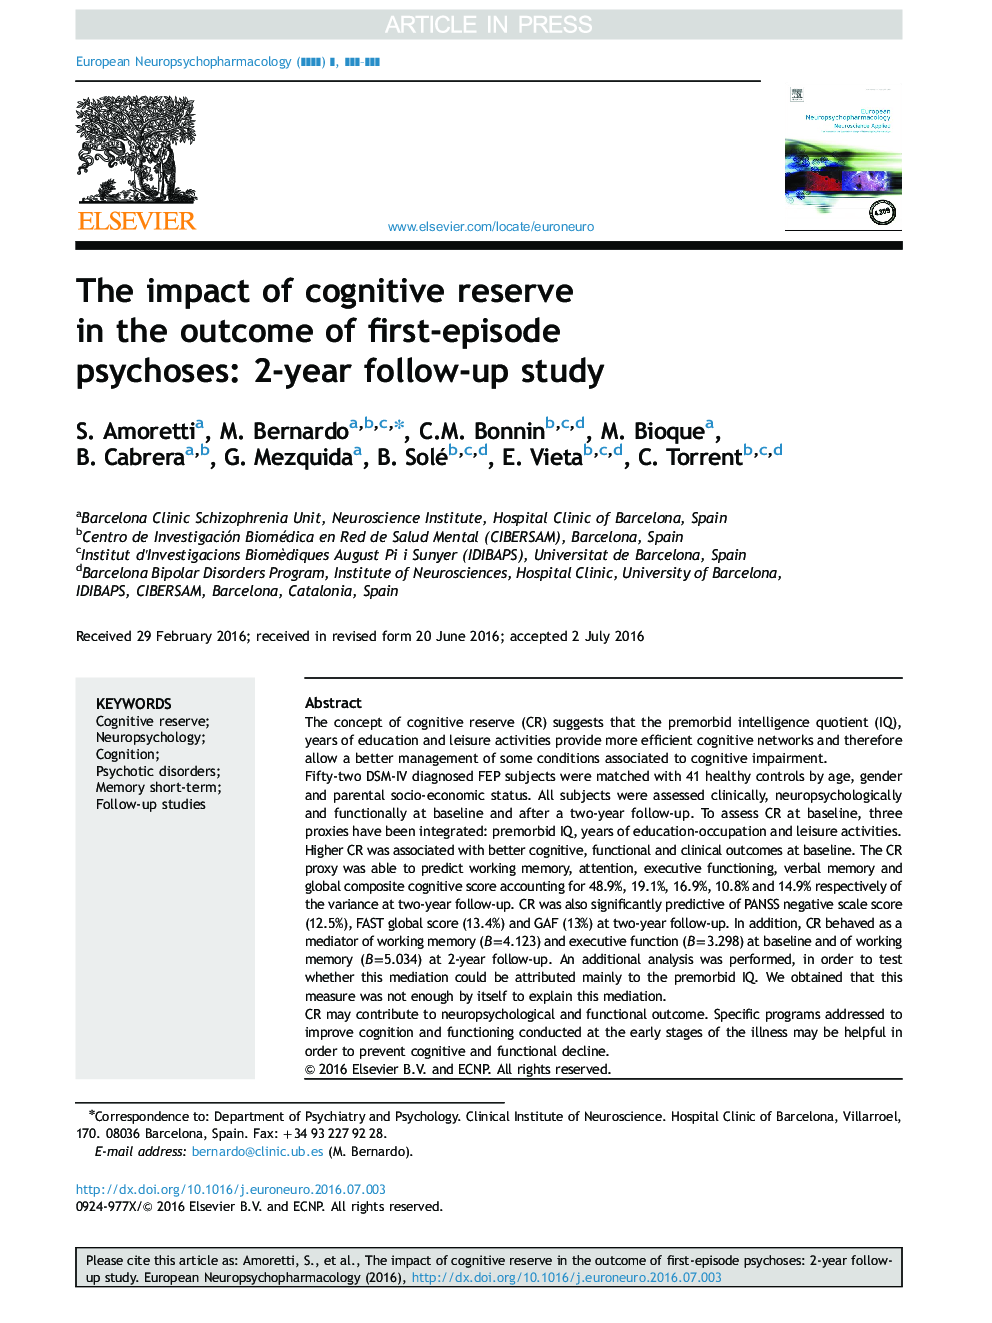 The impact of cognitive reserve in the outcome of first-episode psychoses: 2-year follow-up study